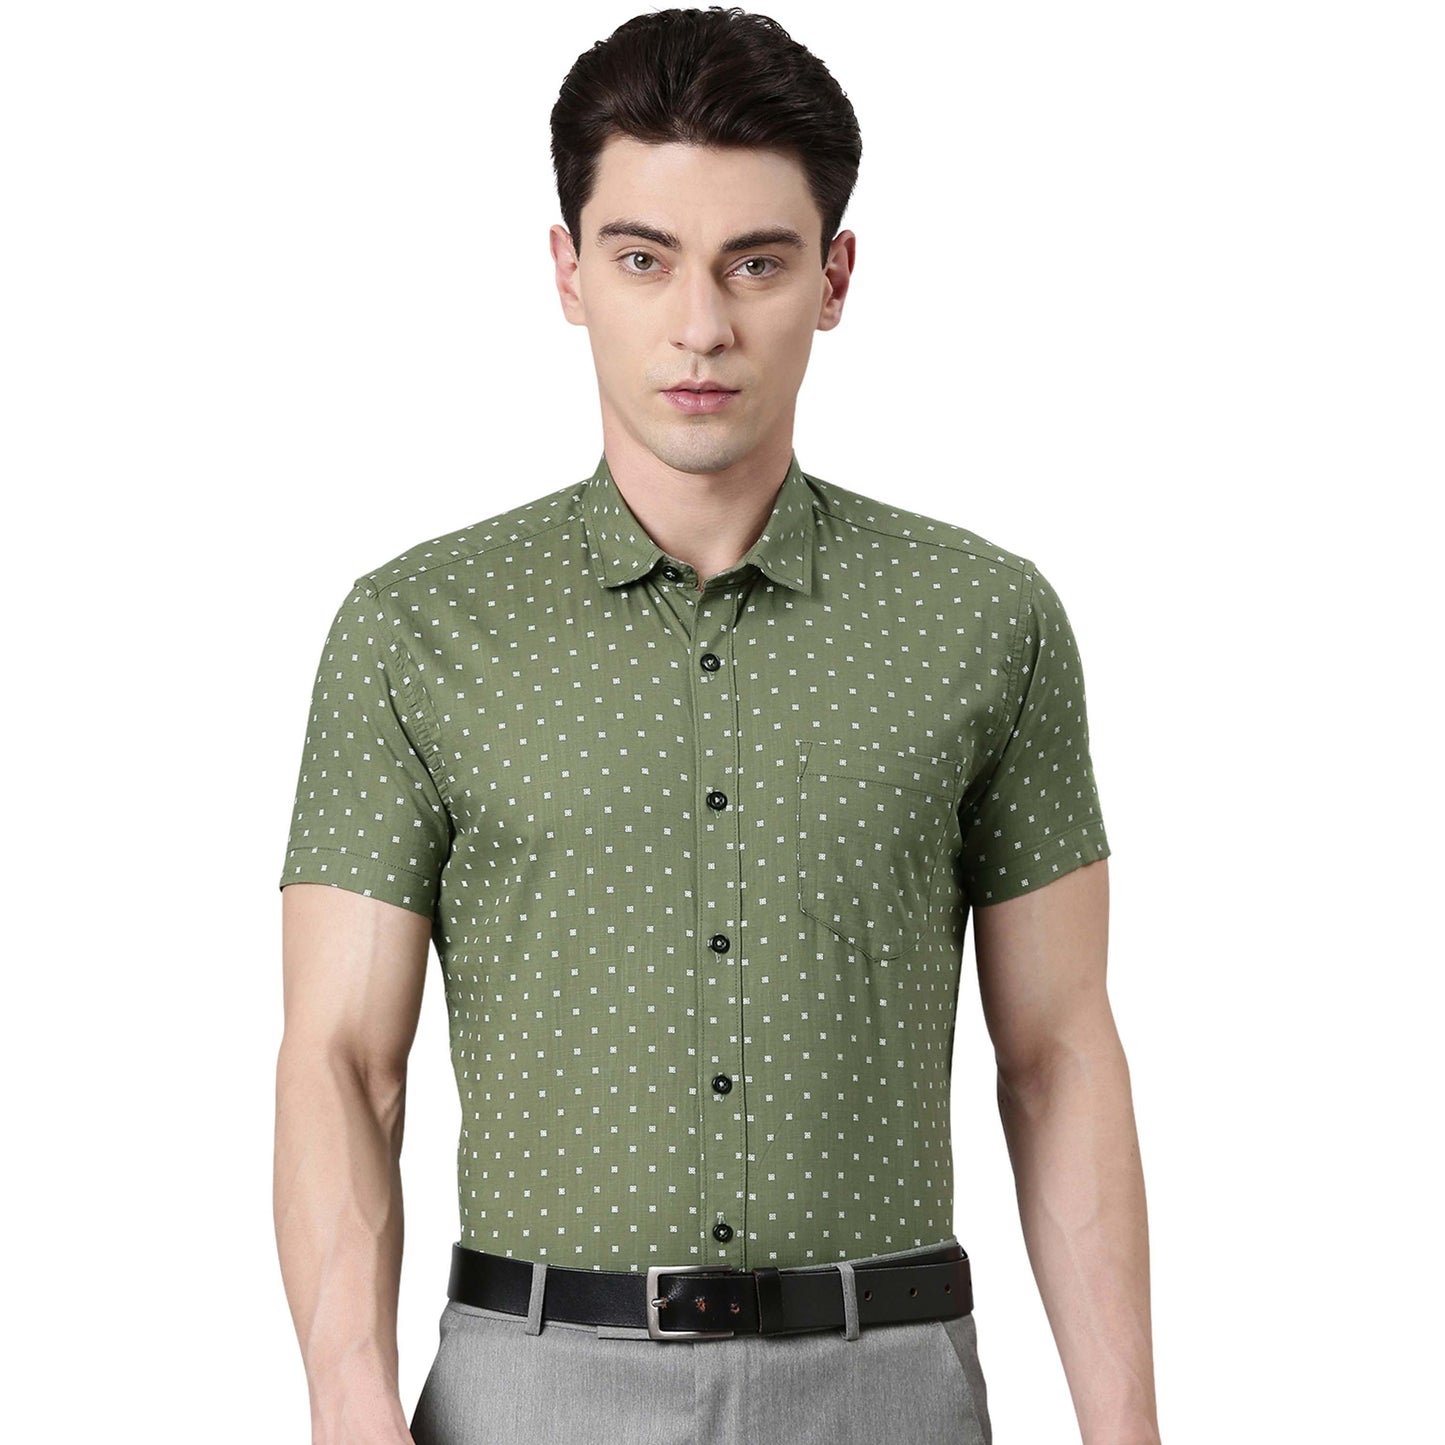 5thanfold Men's Pure Cotton Formal Half Sleeve Checkered Green Slim Fit Shirt